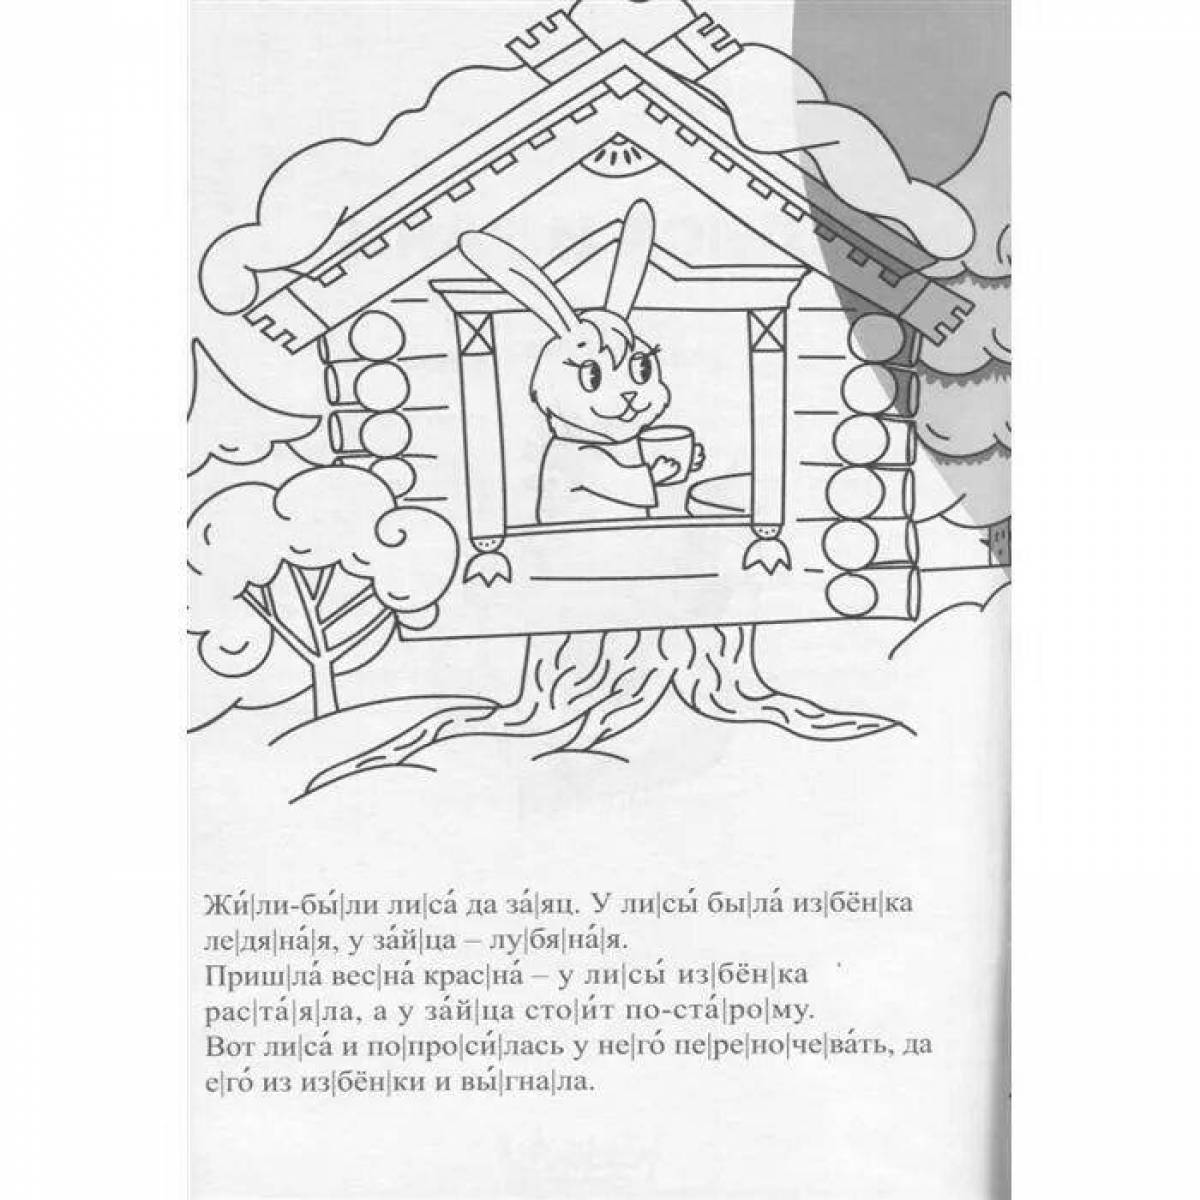 Elegant washcloths and ice hut coloring page